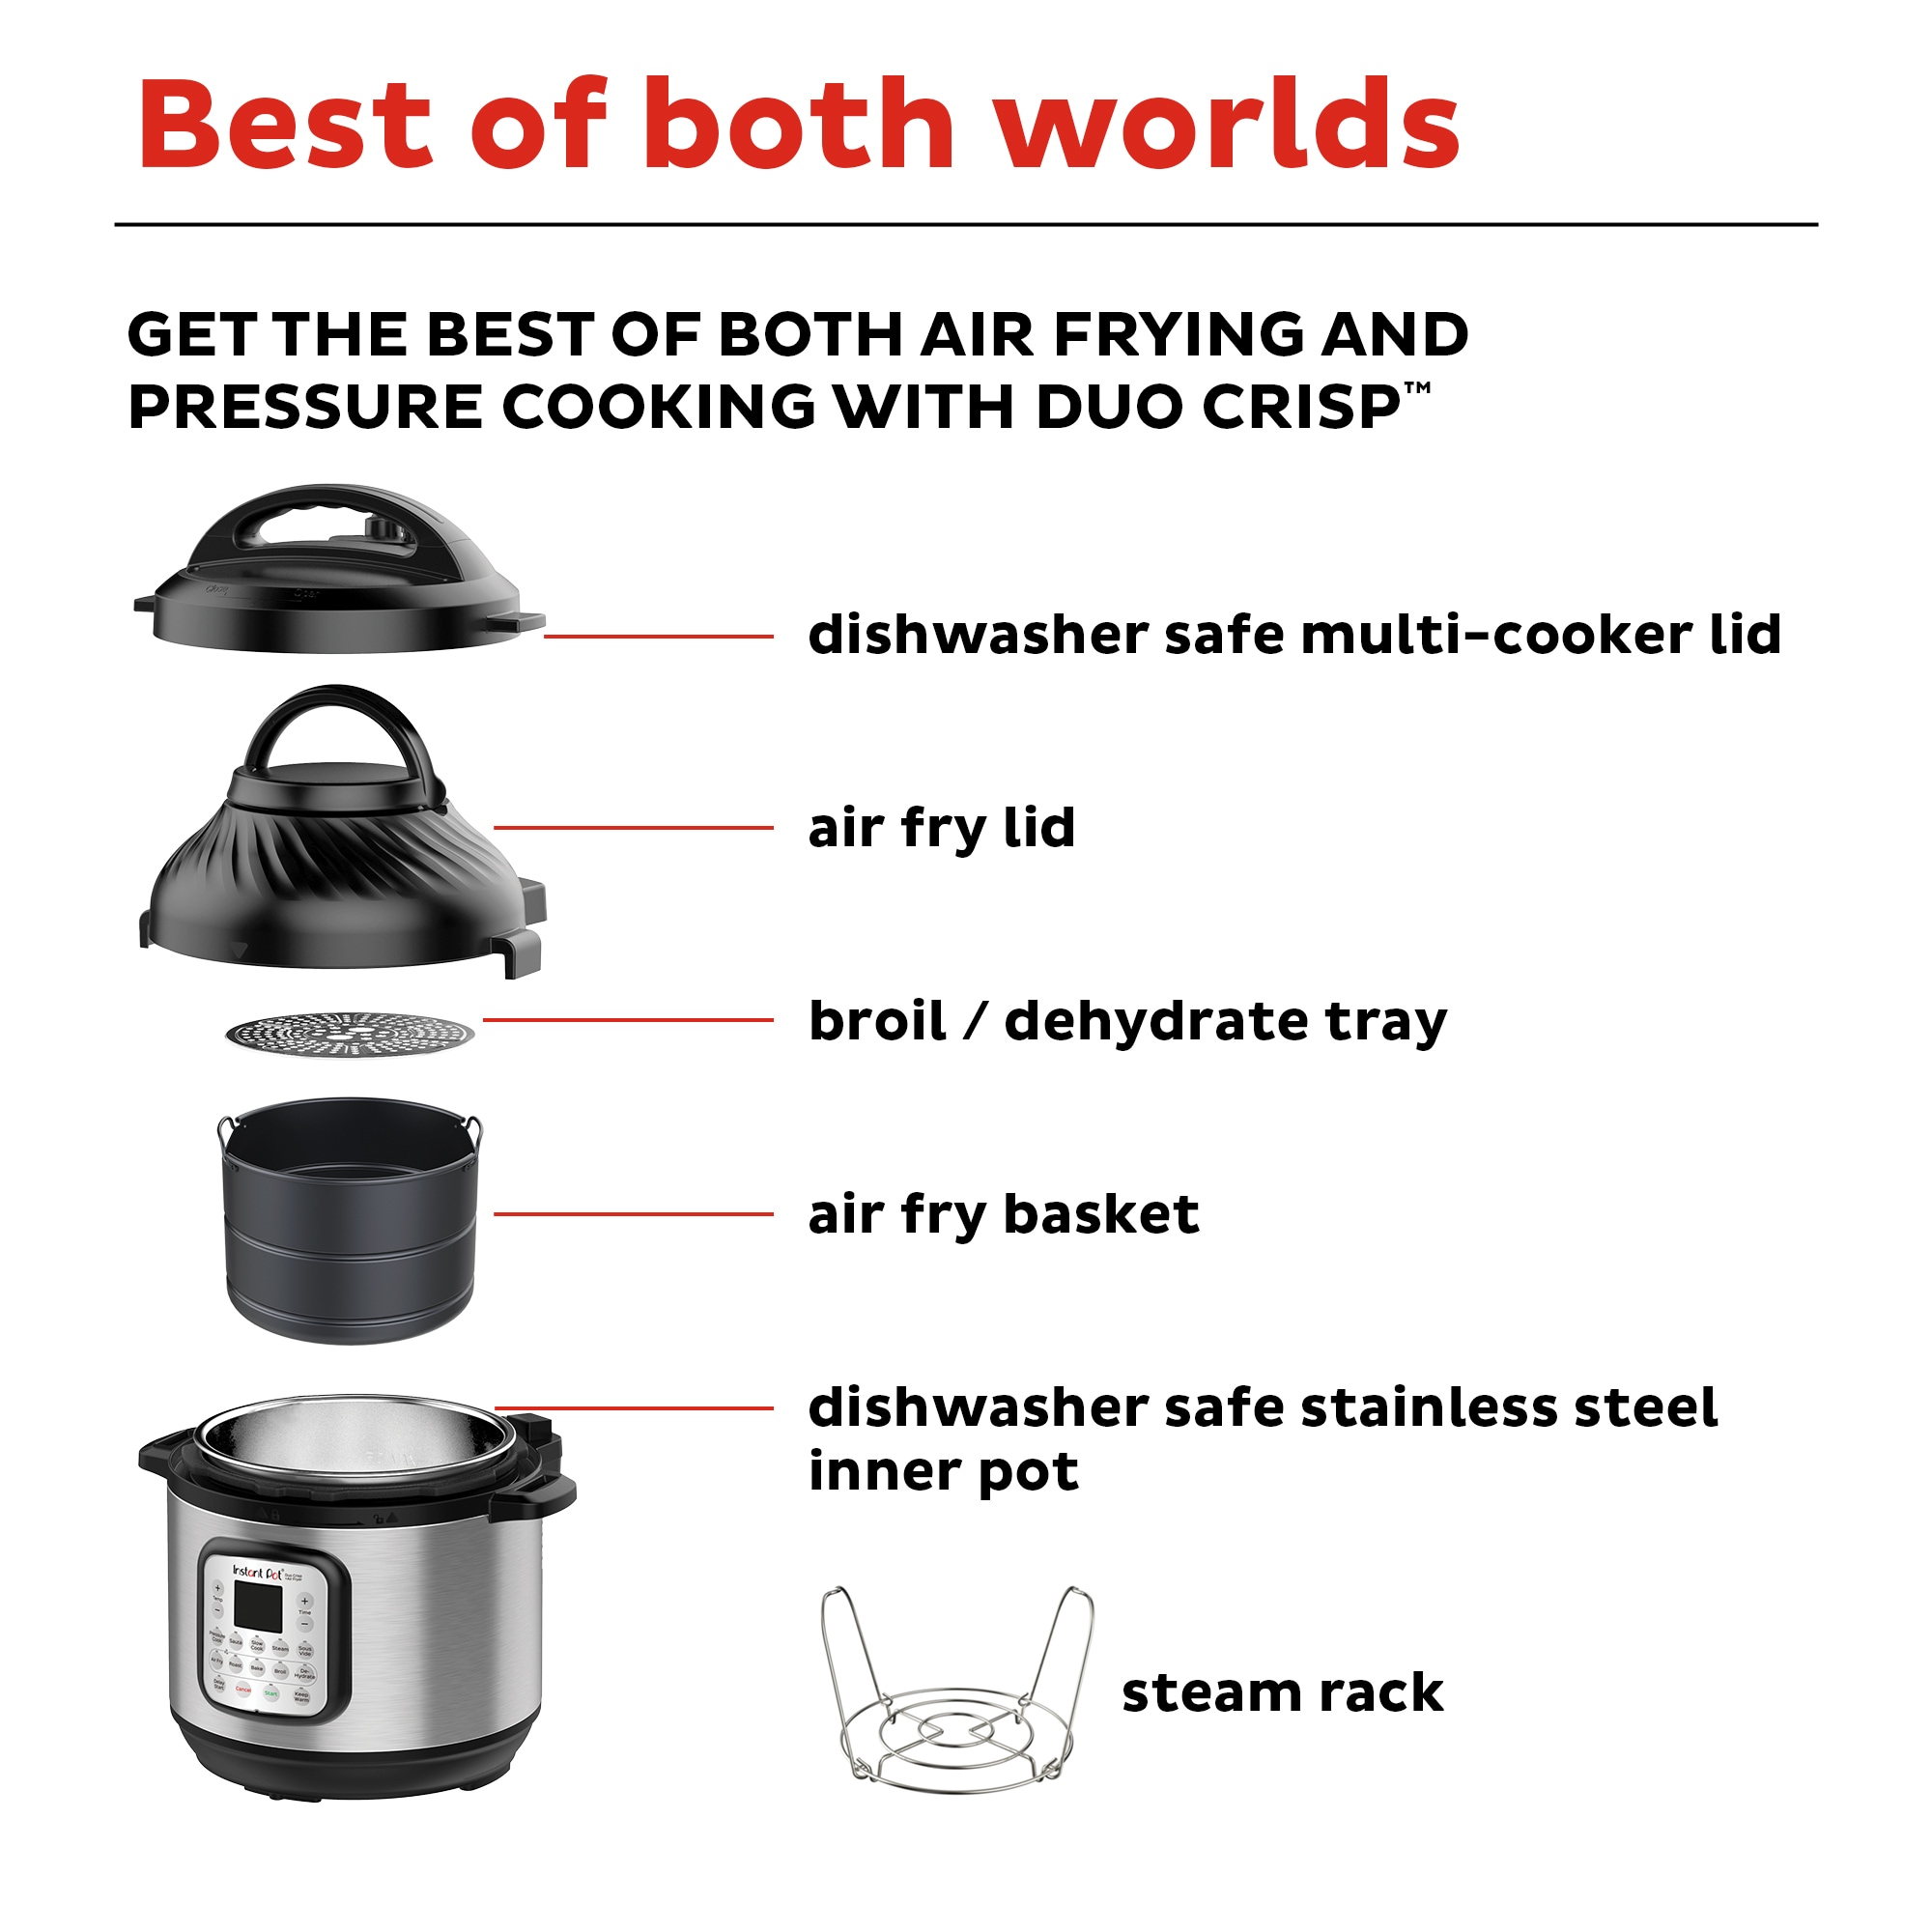 Instant Pot Duo Crisp 9-in-1 Electric Pressure Cooker and Air Fryer Combo  with Stainless Steel Pot, Pressure Cook, Slow Cook, Air Fry, Roast, Steam